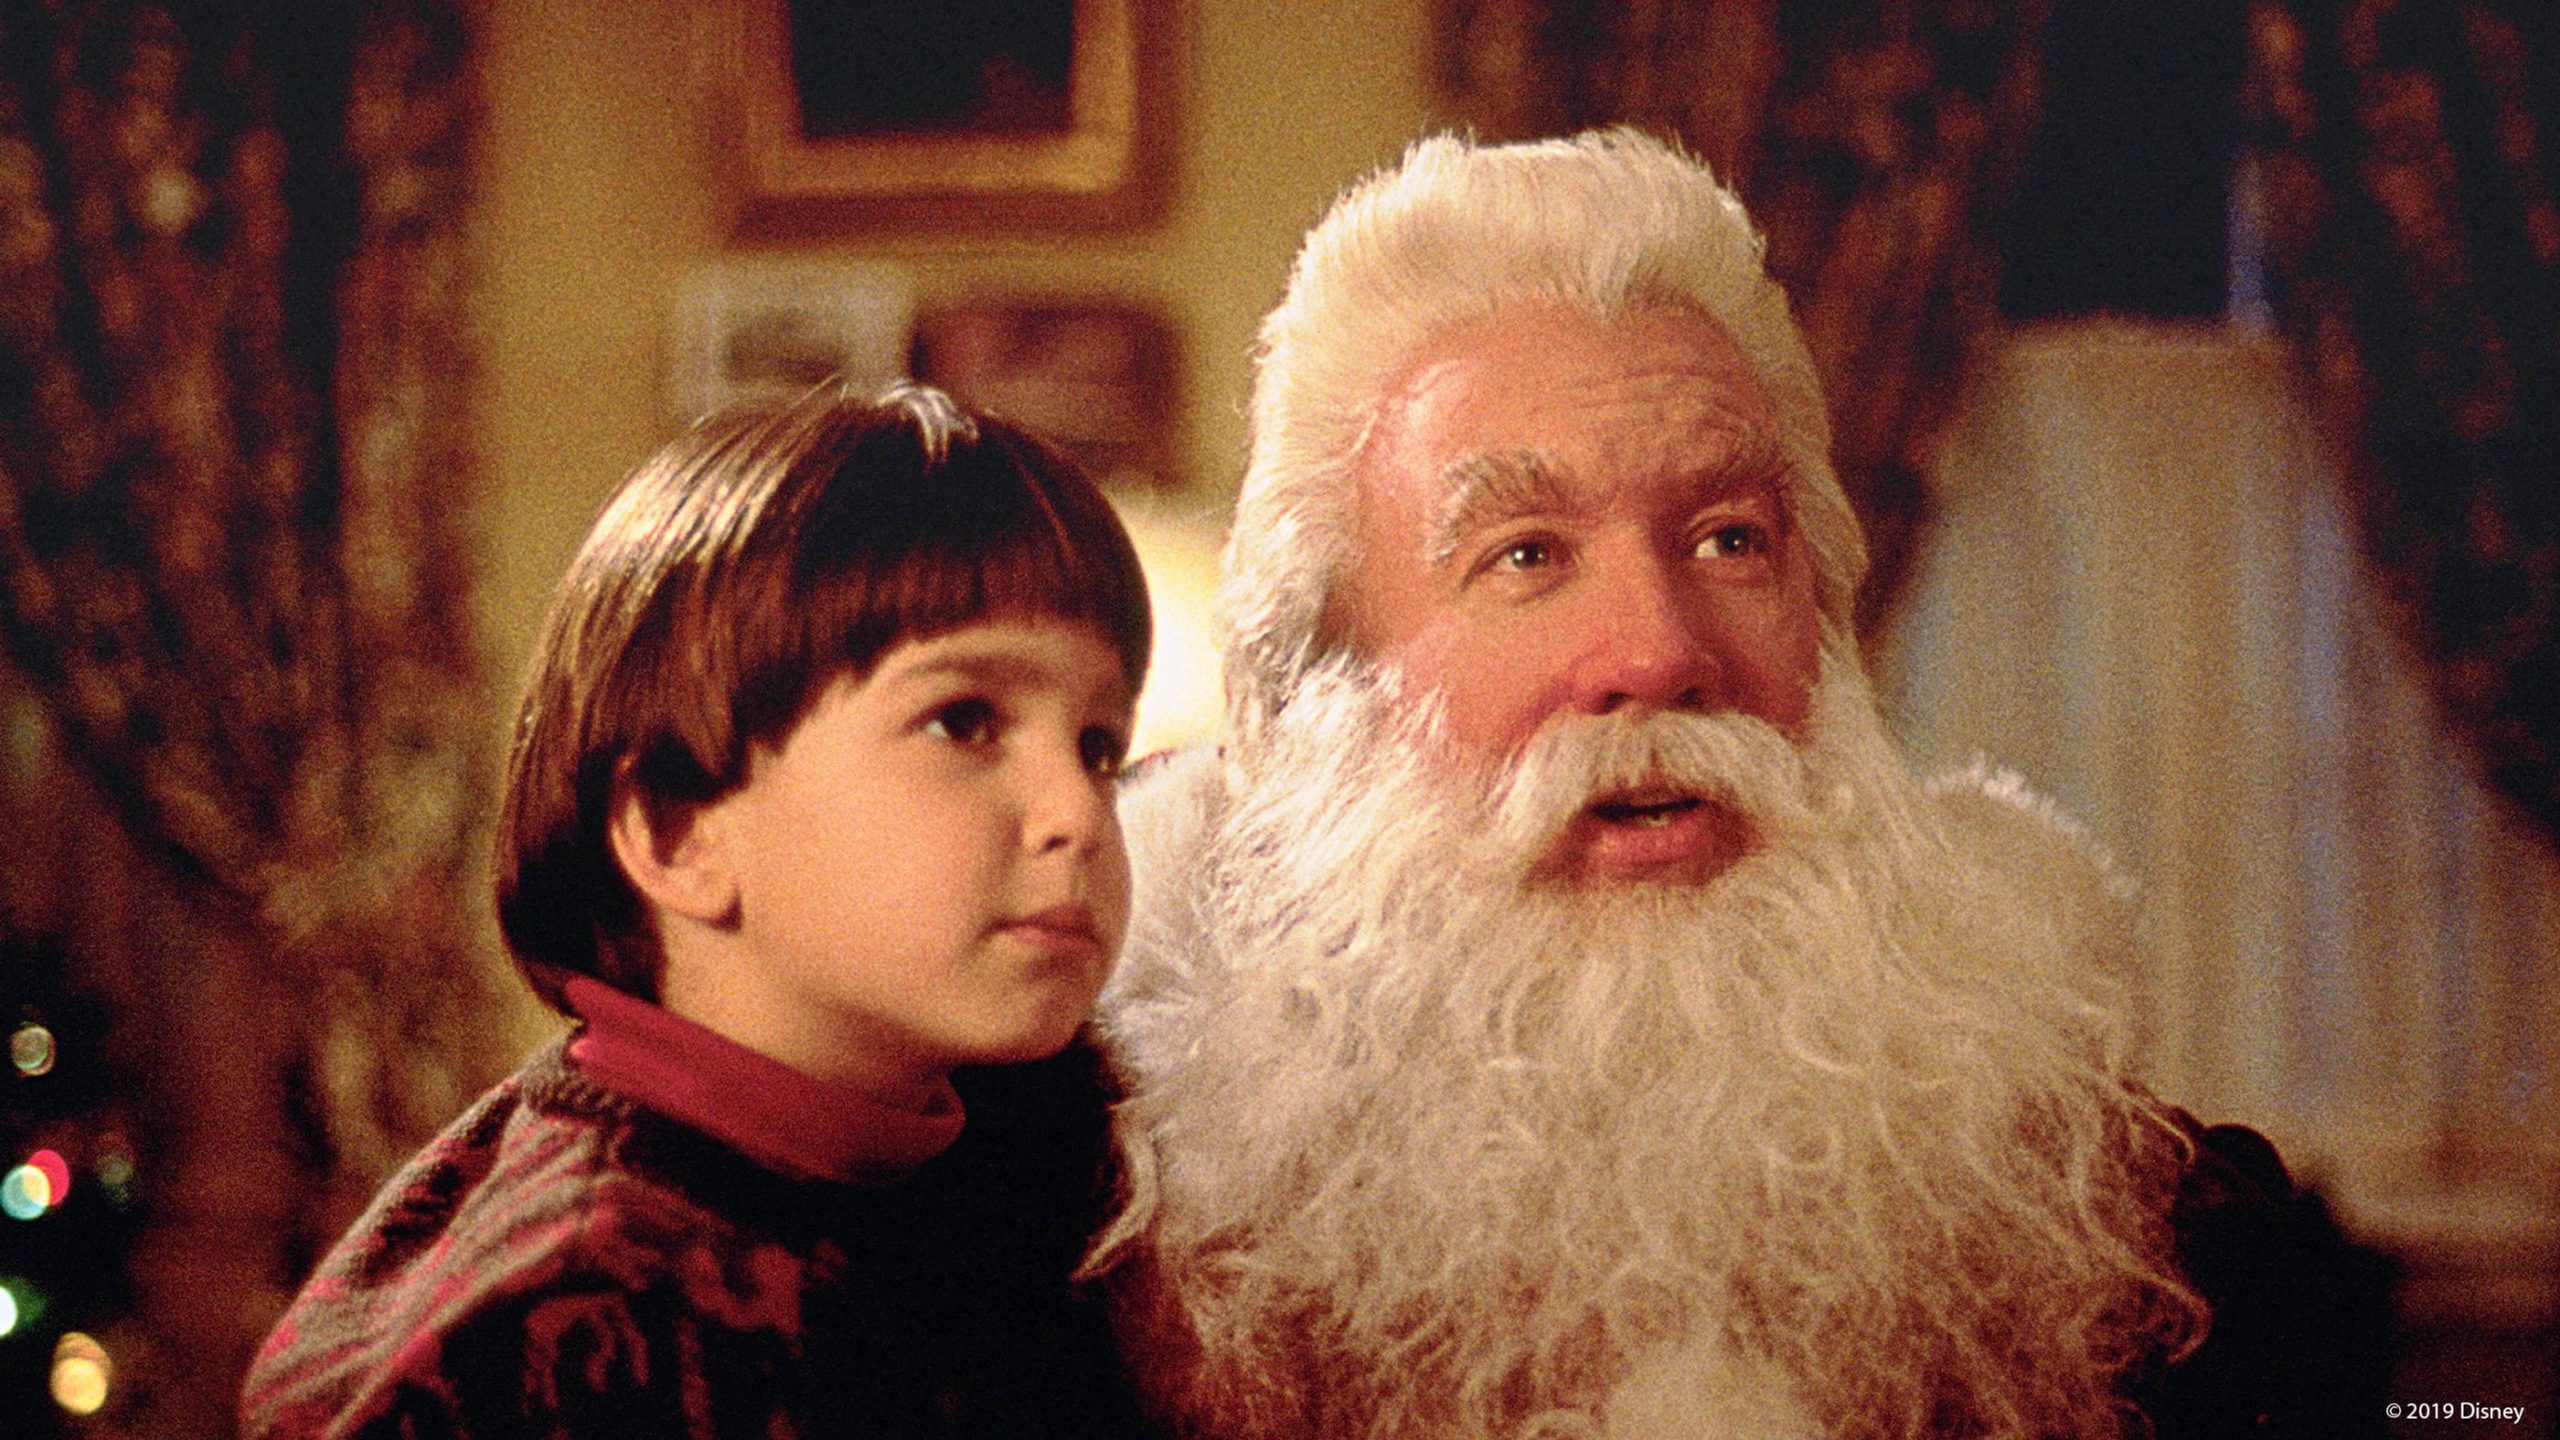 Movies On The Lawn: The Santa Clause